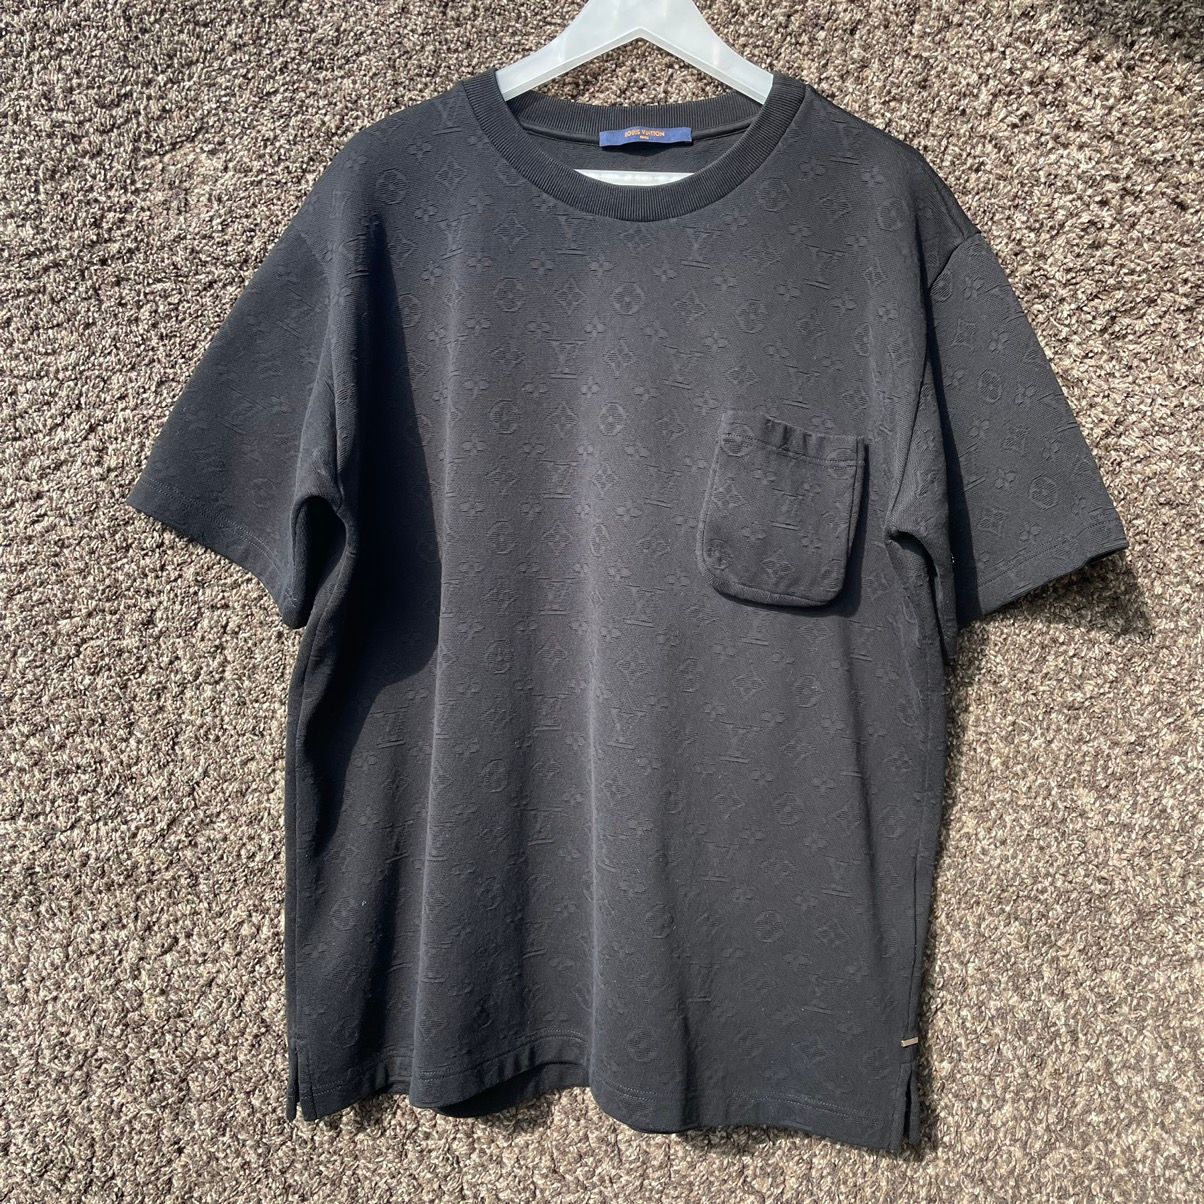 LV 3D Pocket Tee!!! Just got it dry cleaned!!! Size XXL!!!